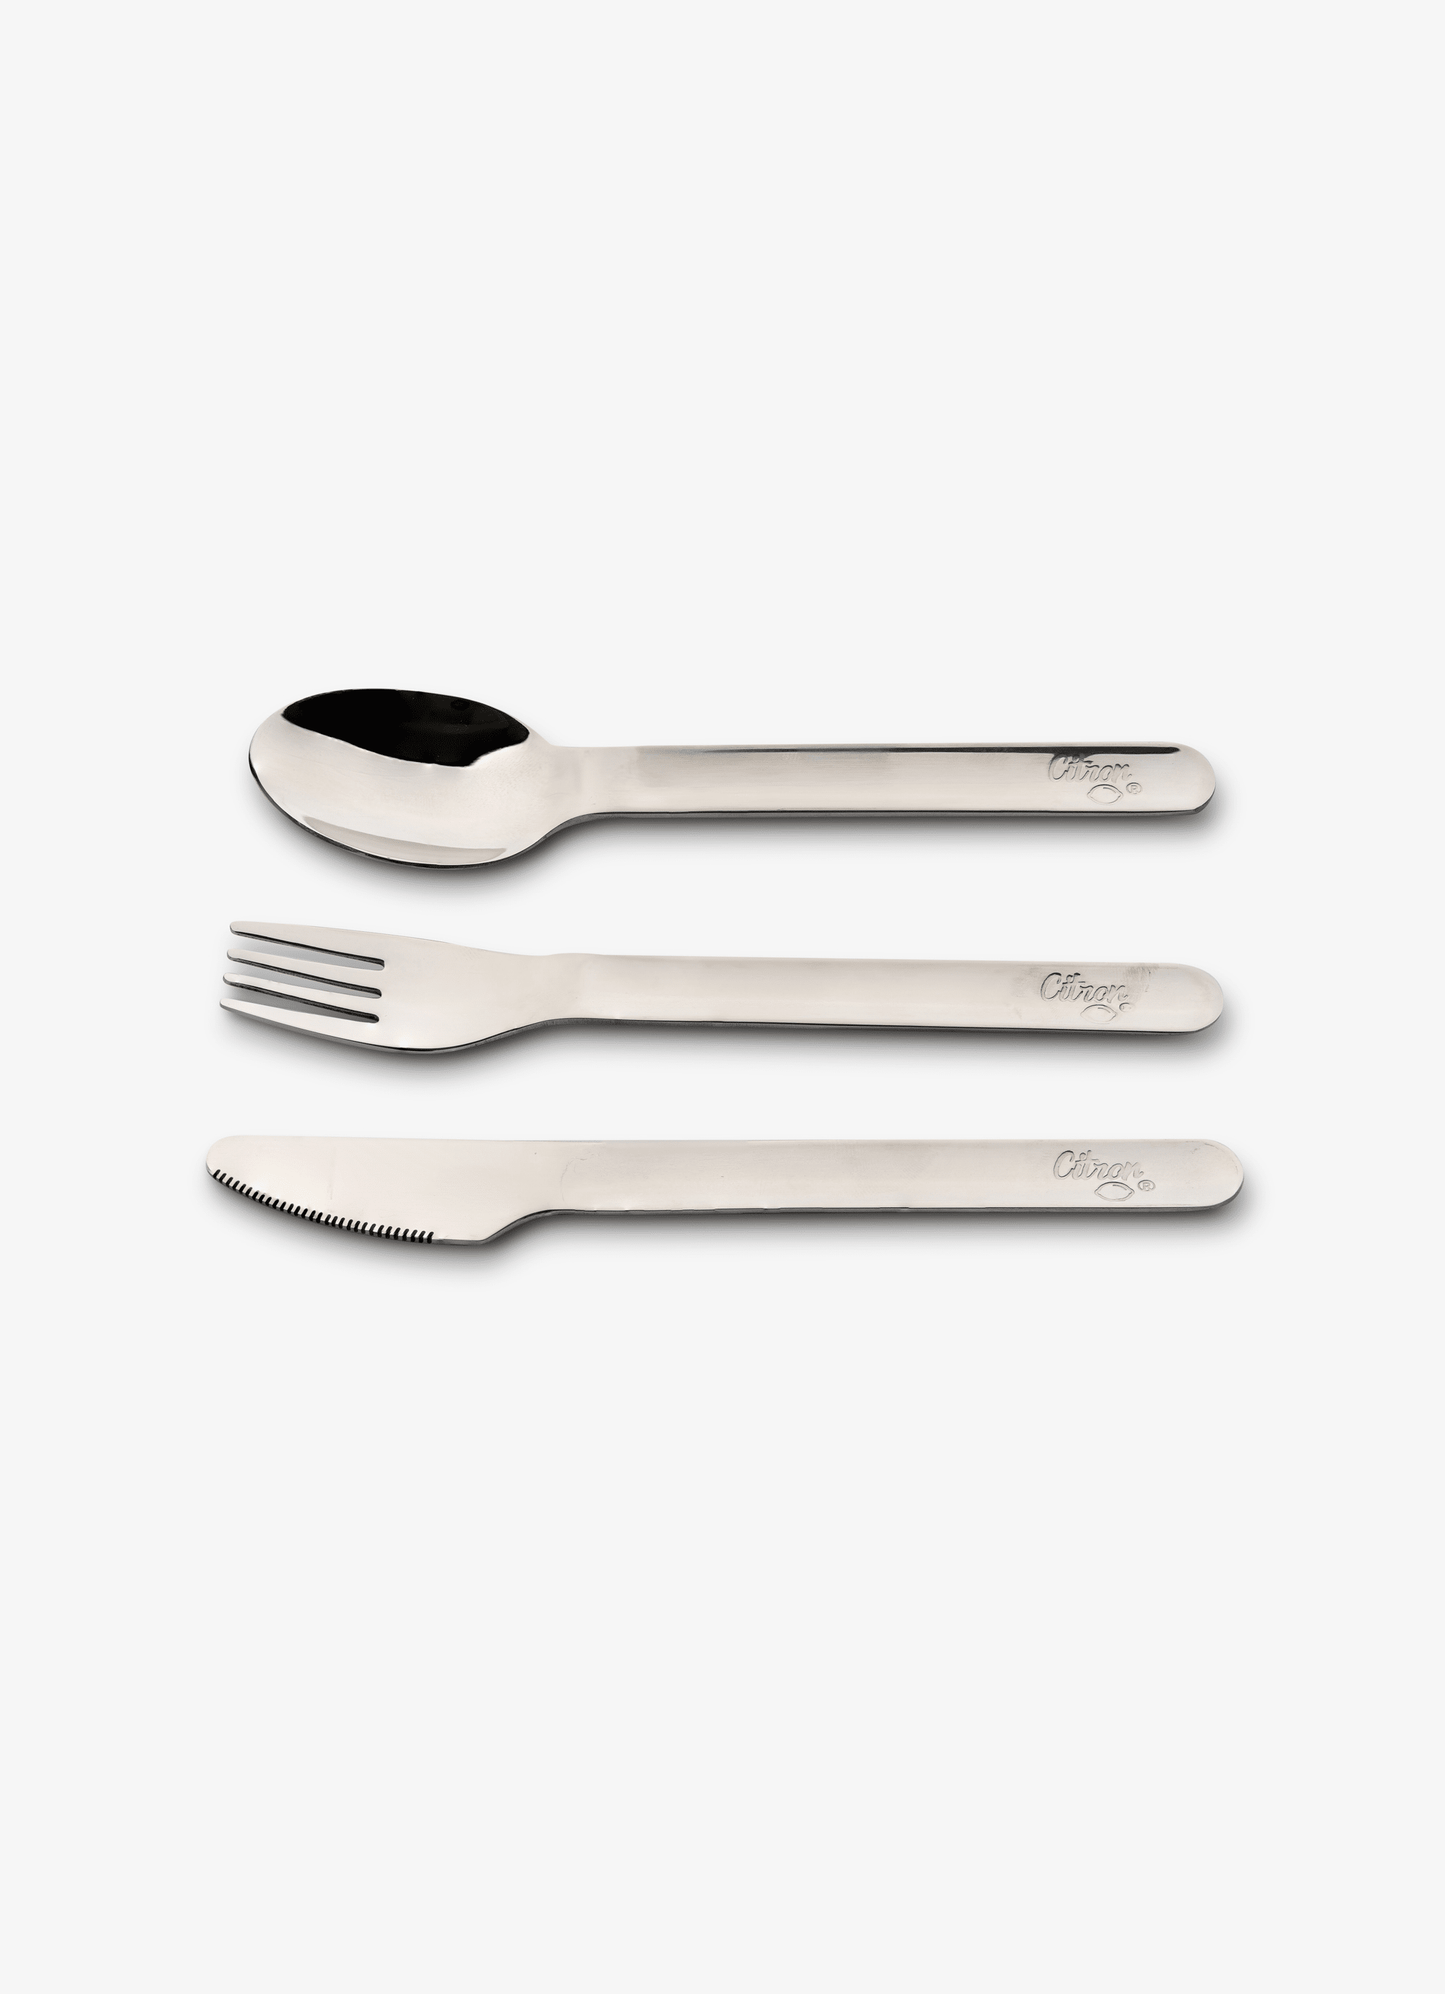 Stainless Steel Cutlery Set - Yellow + Case